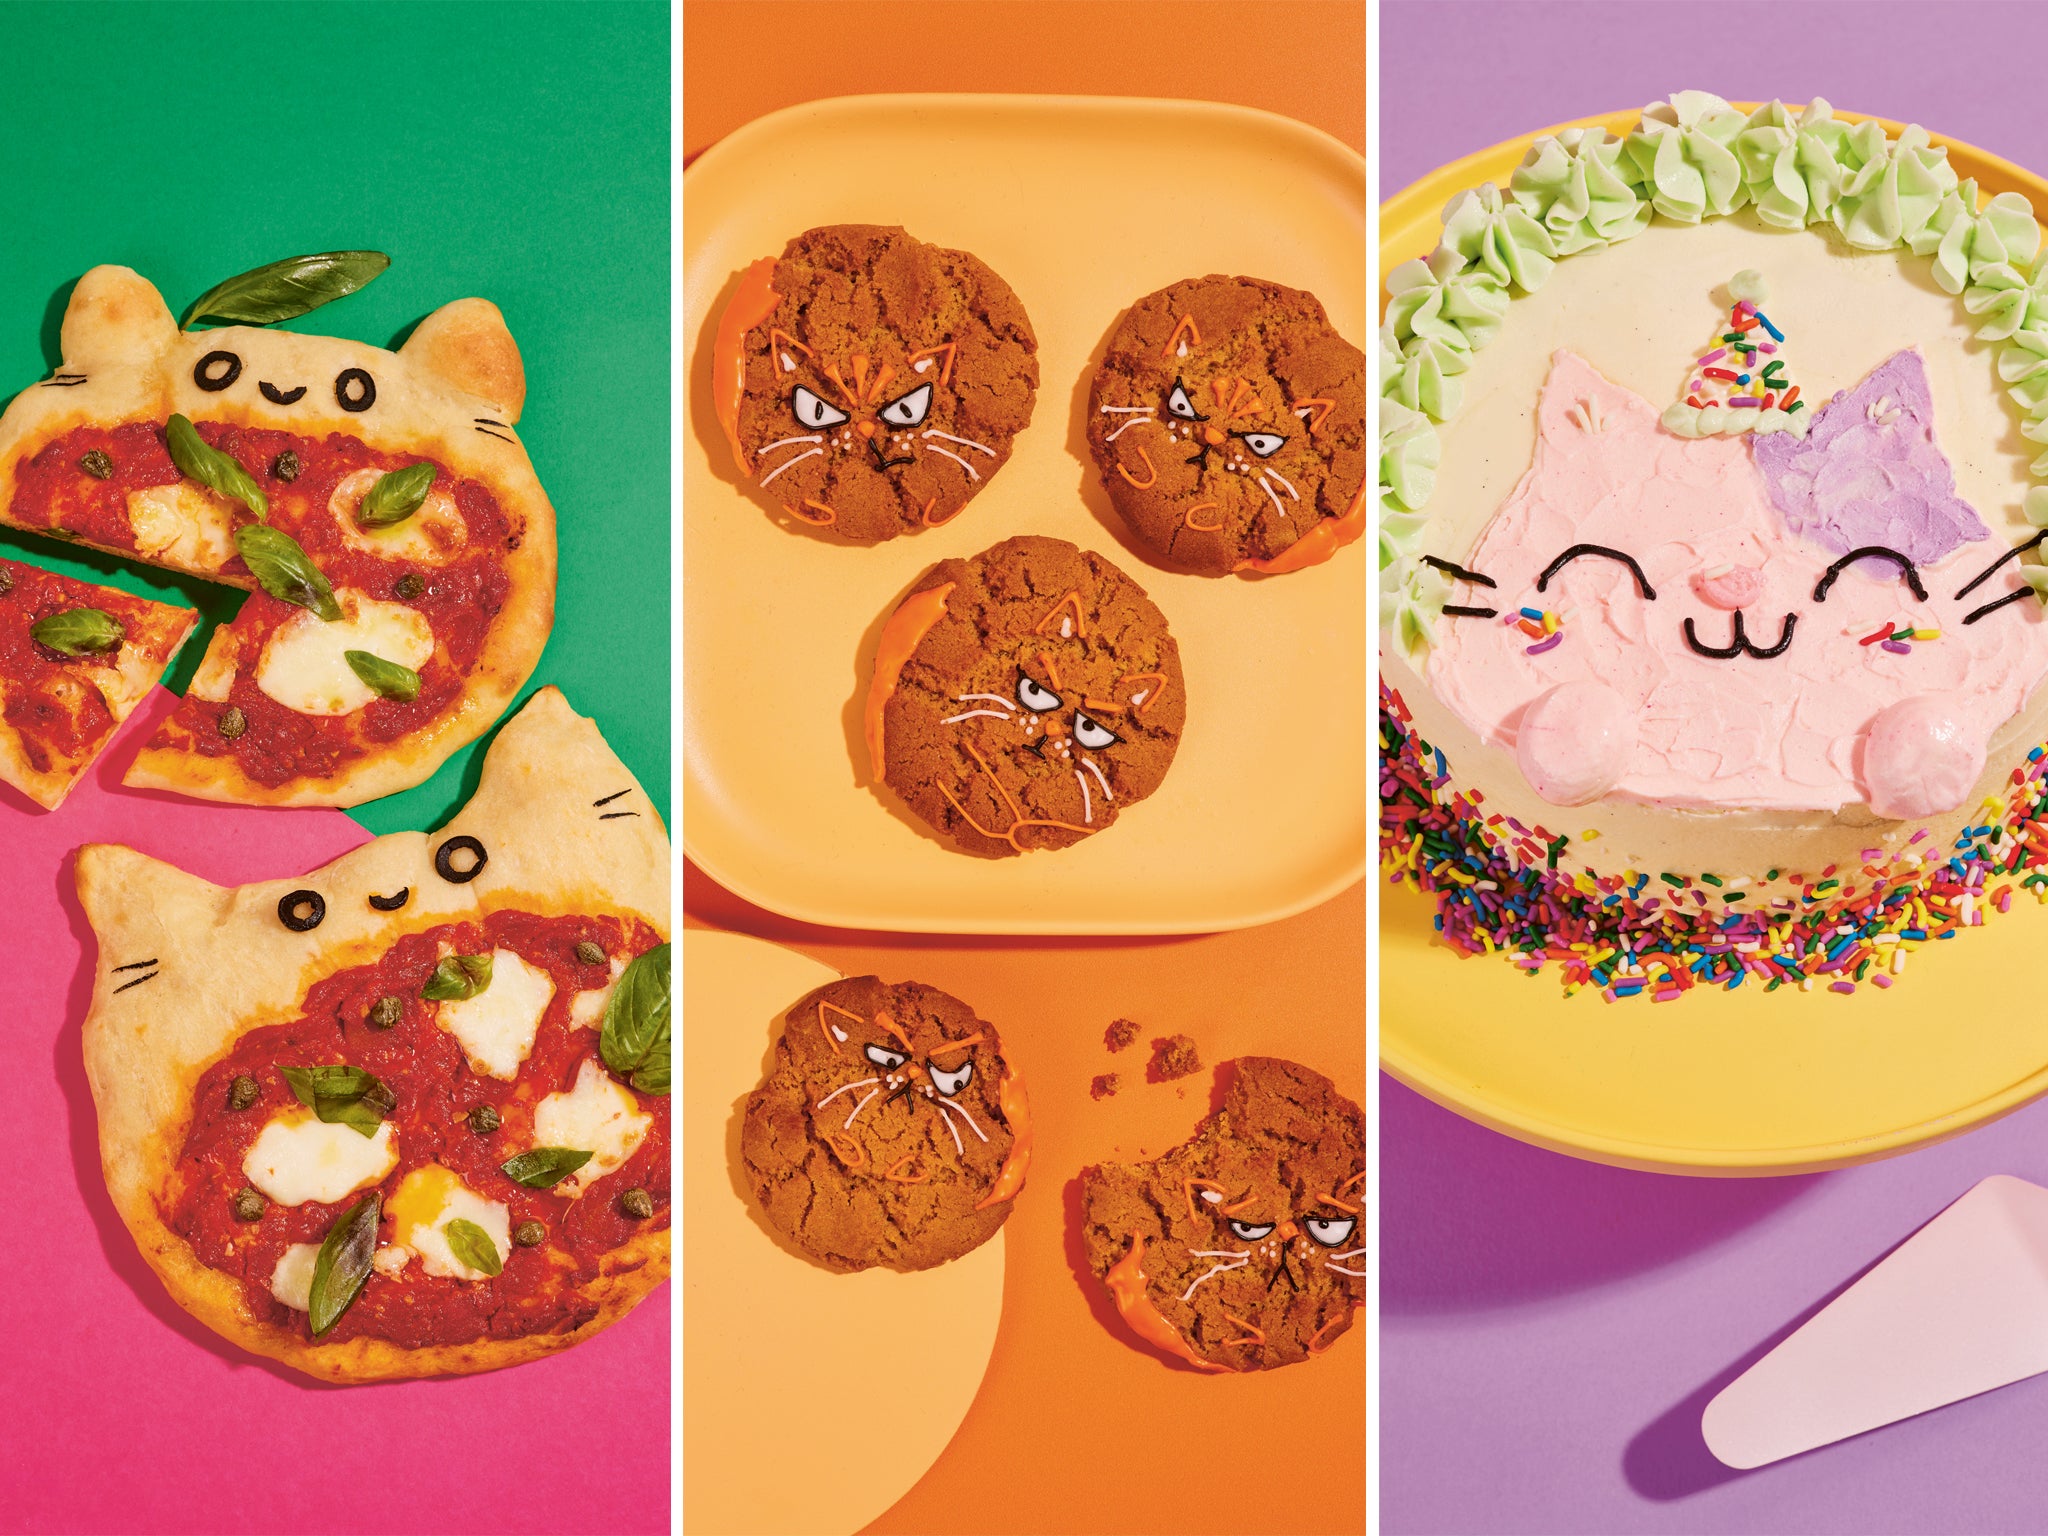 Fat cat pizzas; ginger snap cats; and happy purrthday cake